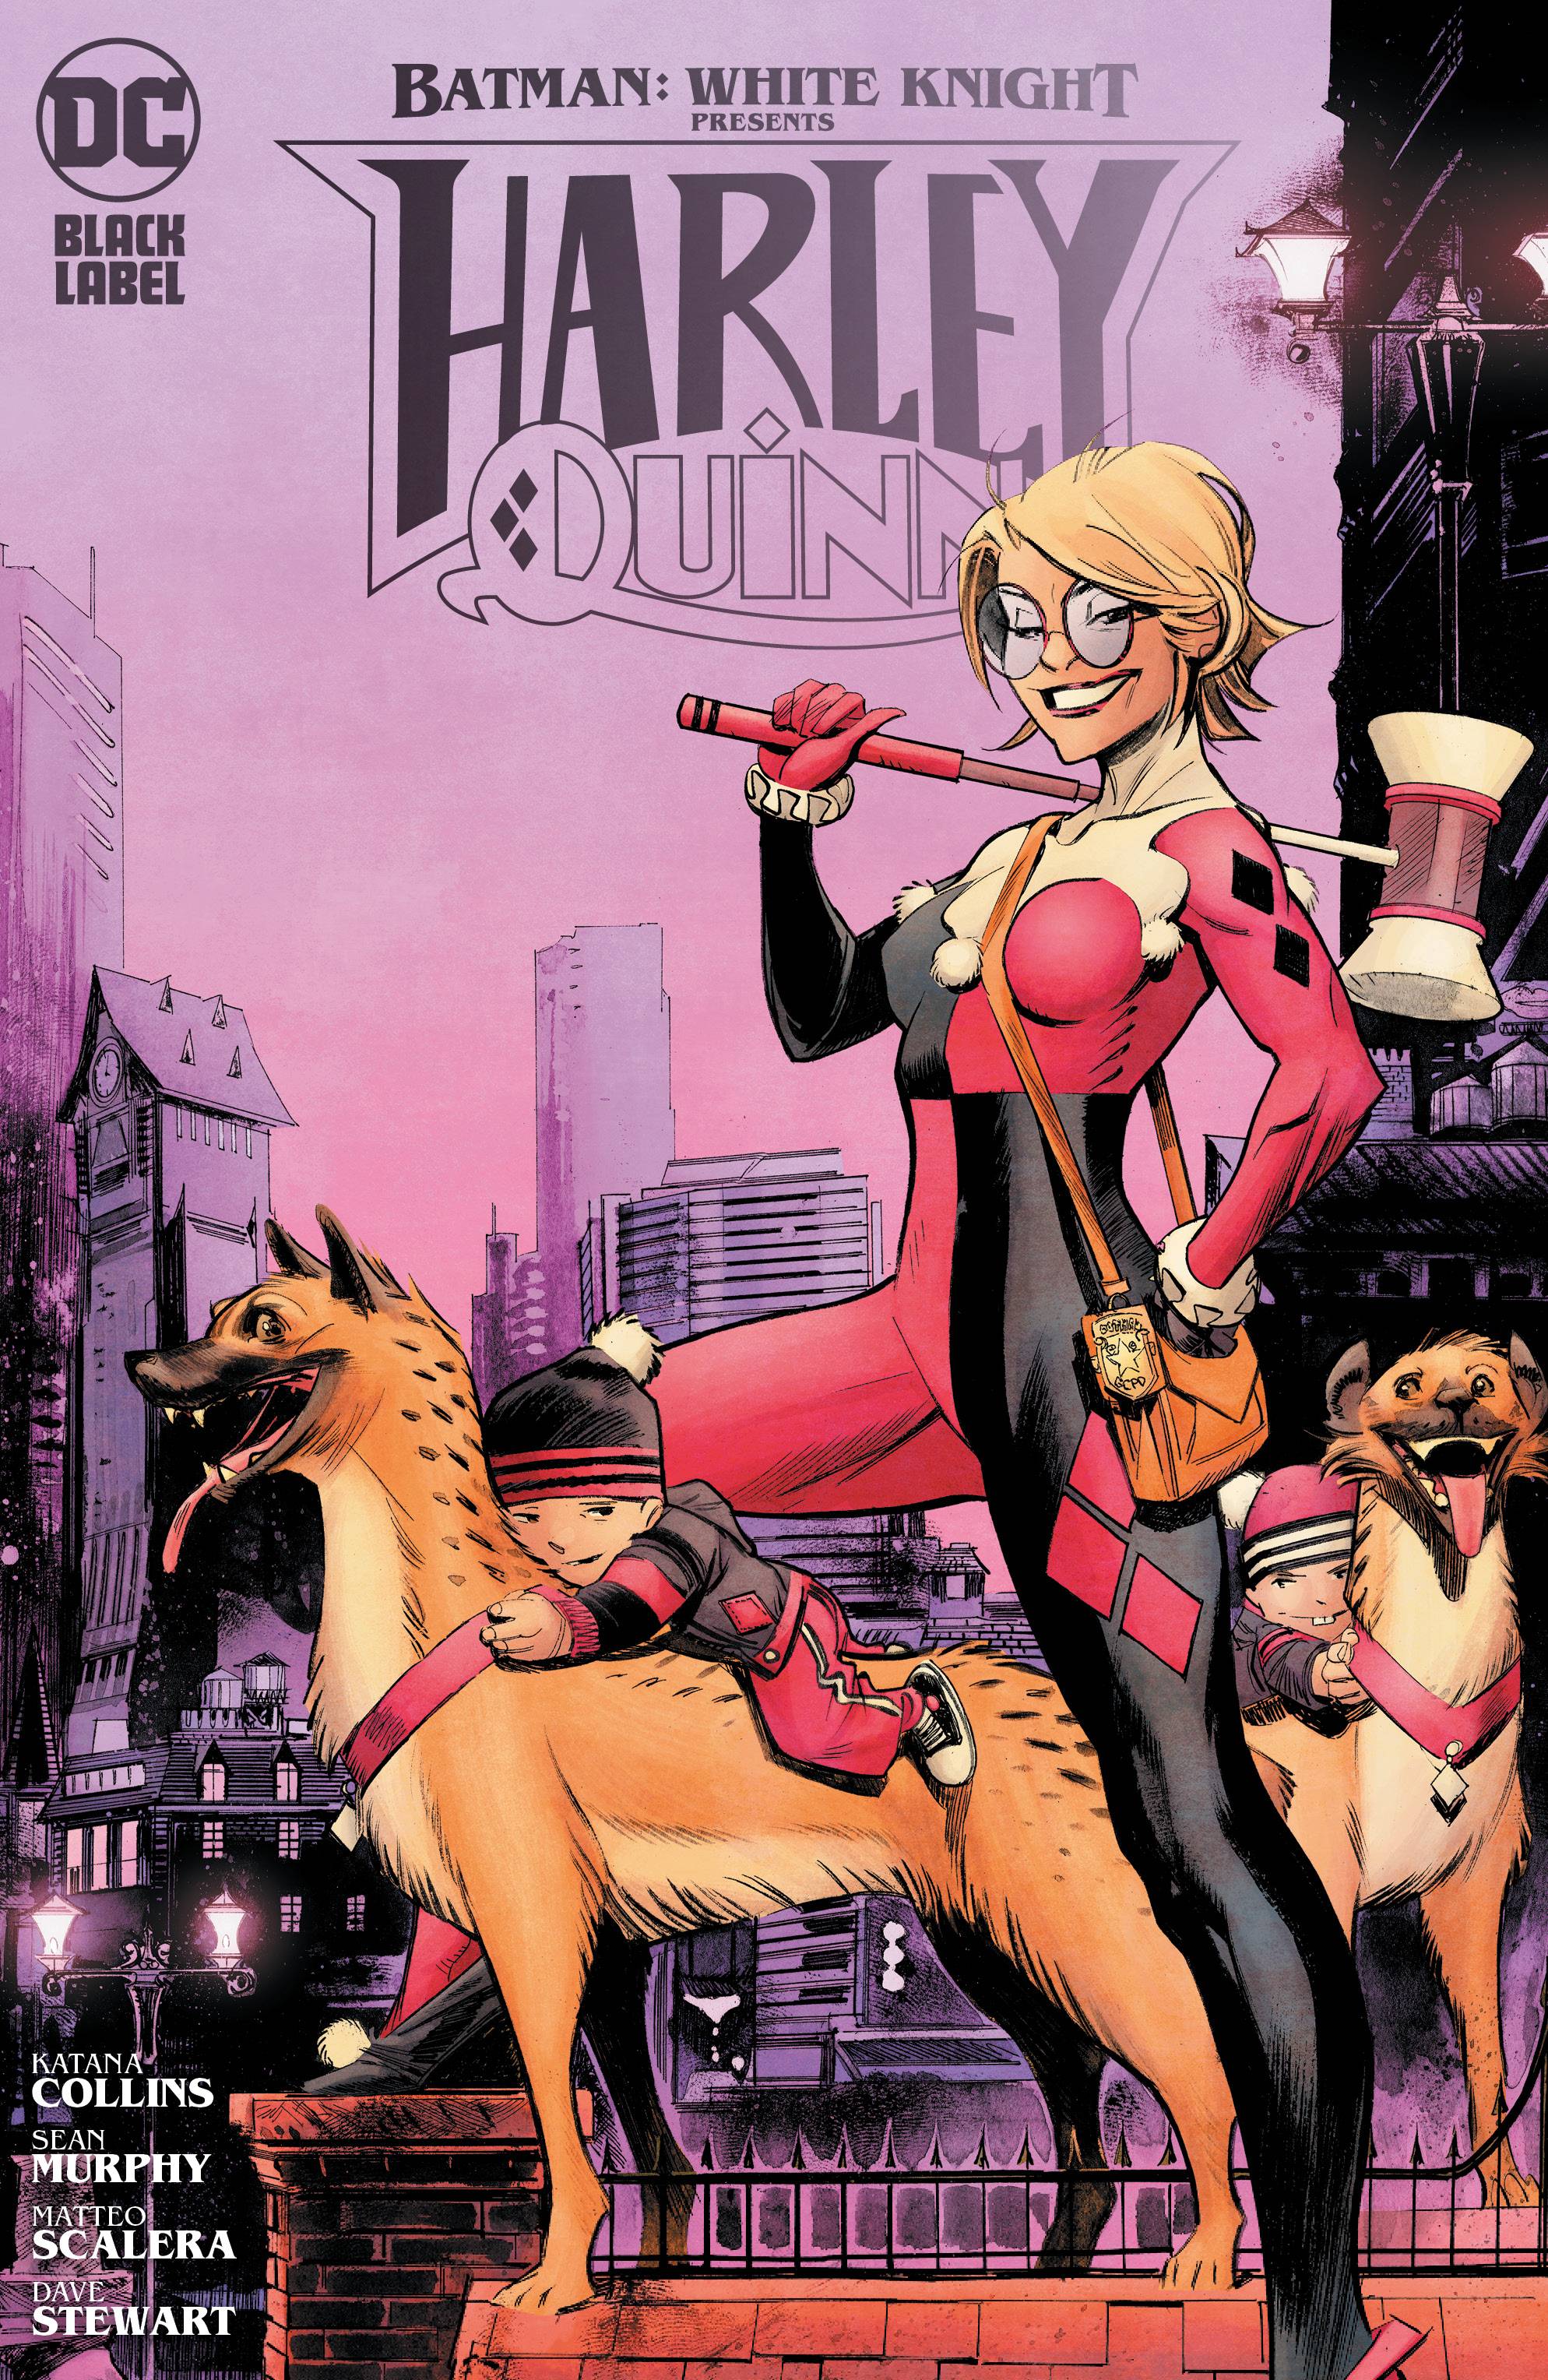 BATMAN WHITE KNIGHT PRESENTS HARLEY QUINN #3 (OF 8) | Game Master's Emporium (The New GME)